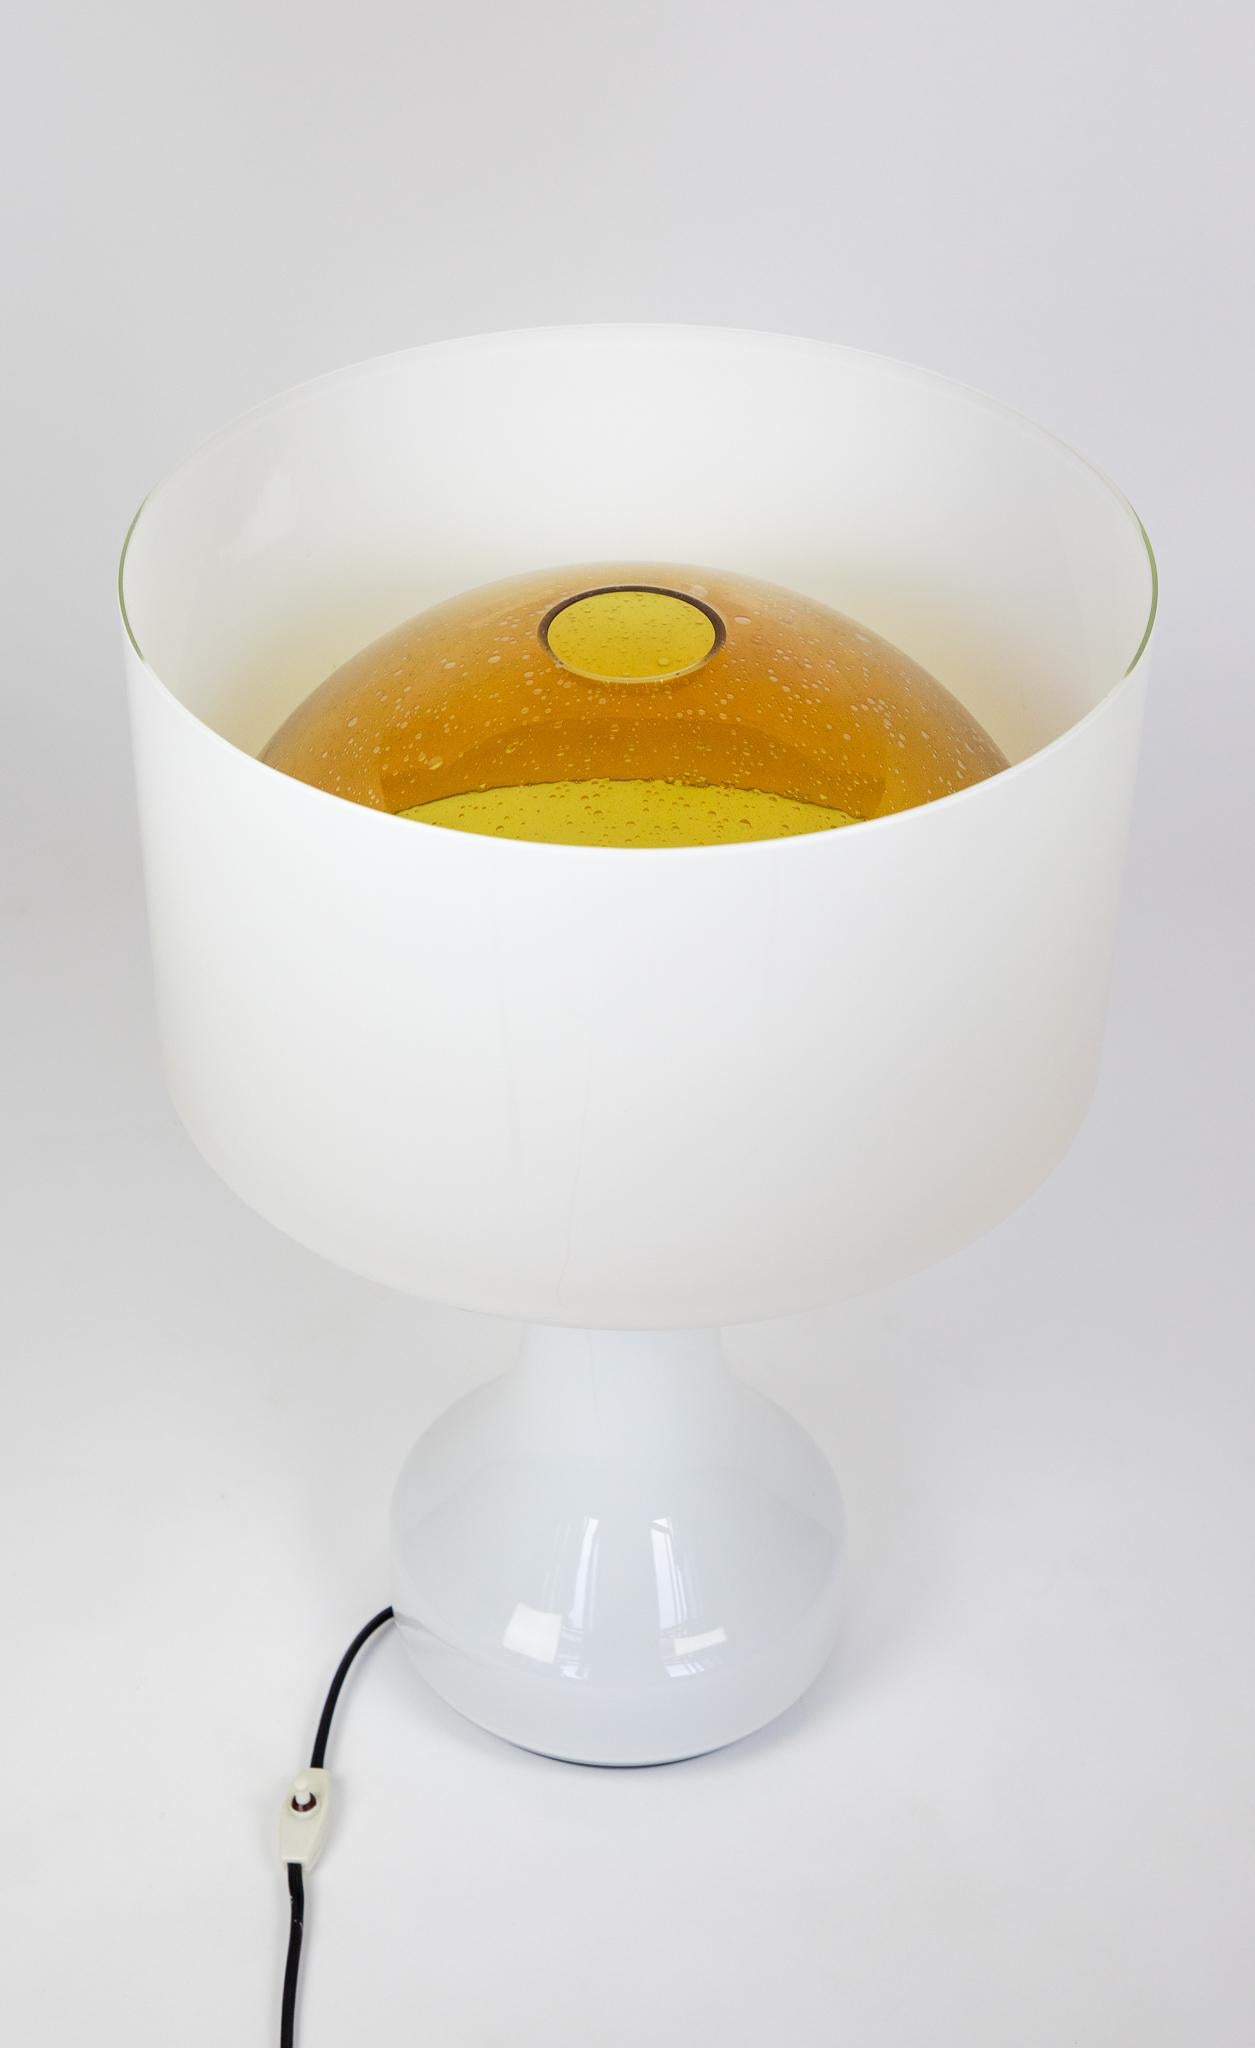 Mid Century Modern Murano Glass Table Lamp Sebenica for Vistosi, Italy, 1960s.

This very large Murano glass table lamp has a wonderful shape. The yellowy amber hemisphere inside the lamp lends a great contrast to the white shell and has small air